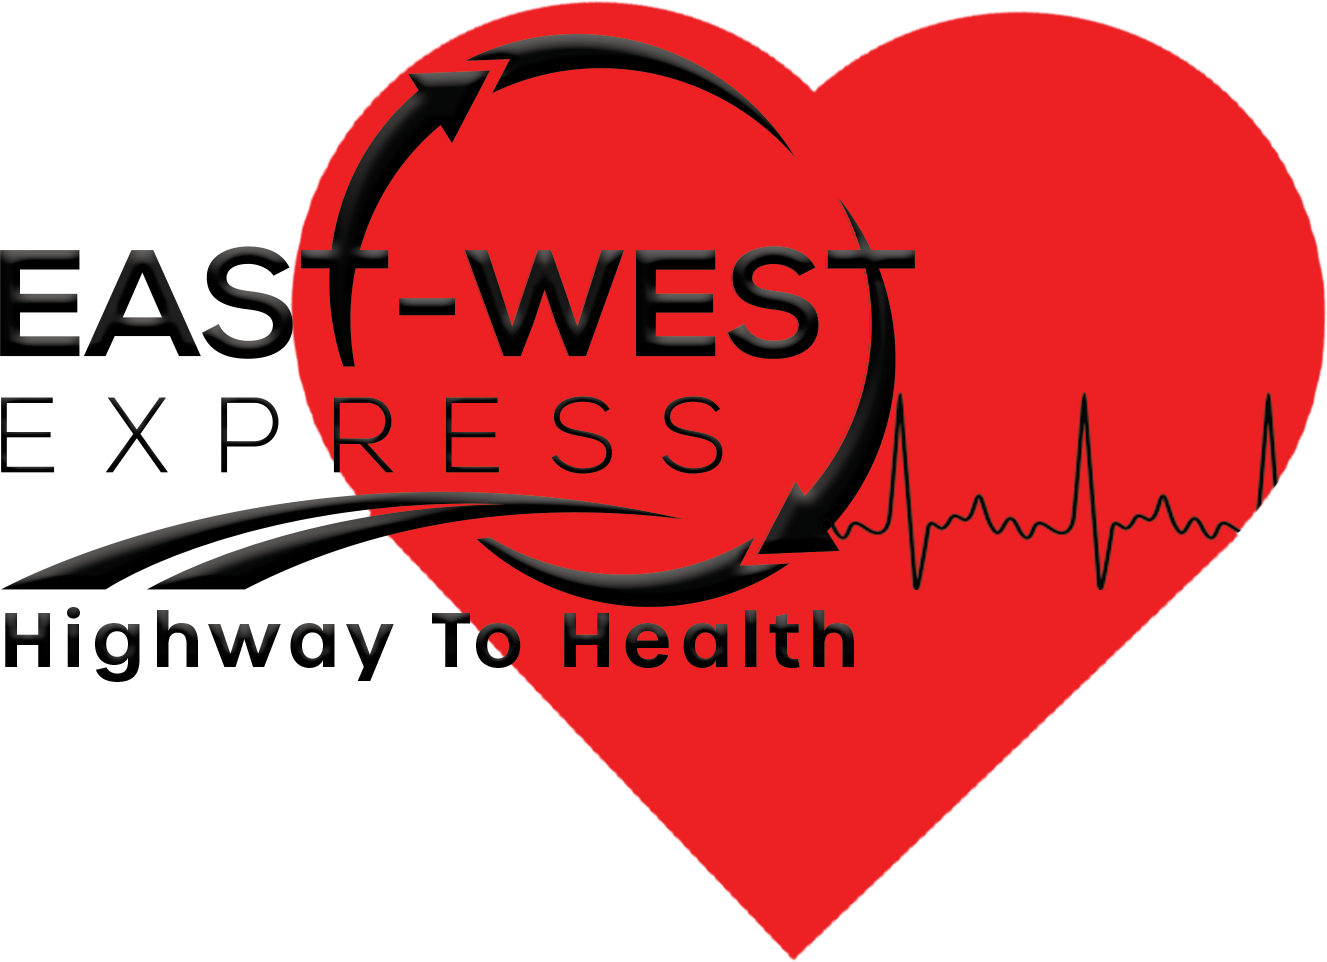 East-West Express Highway to Health